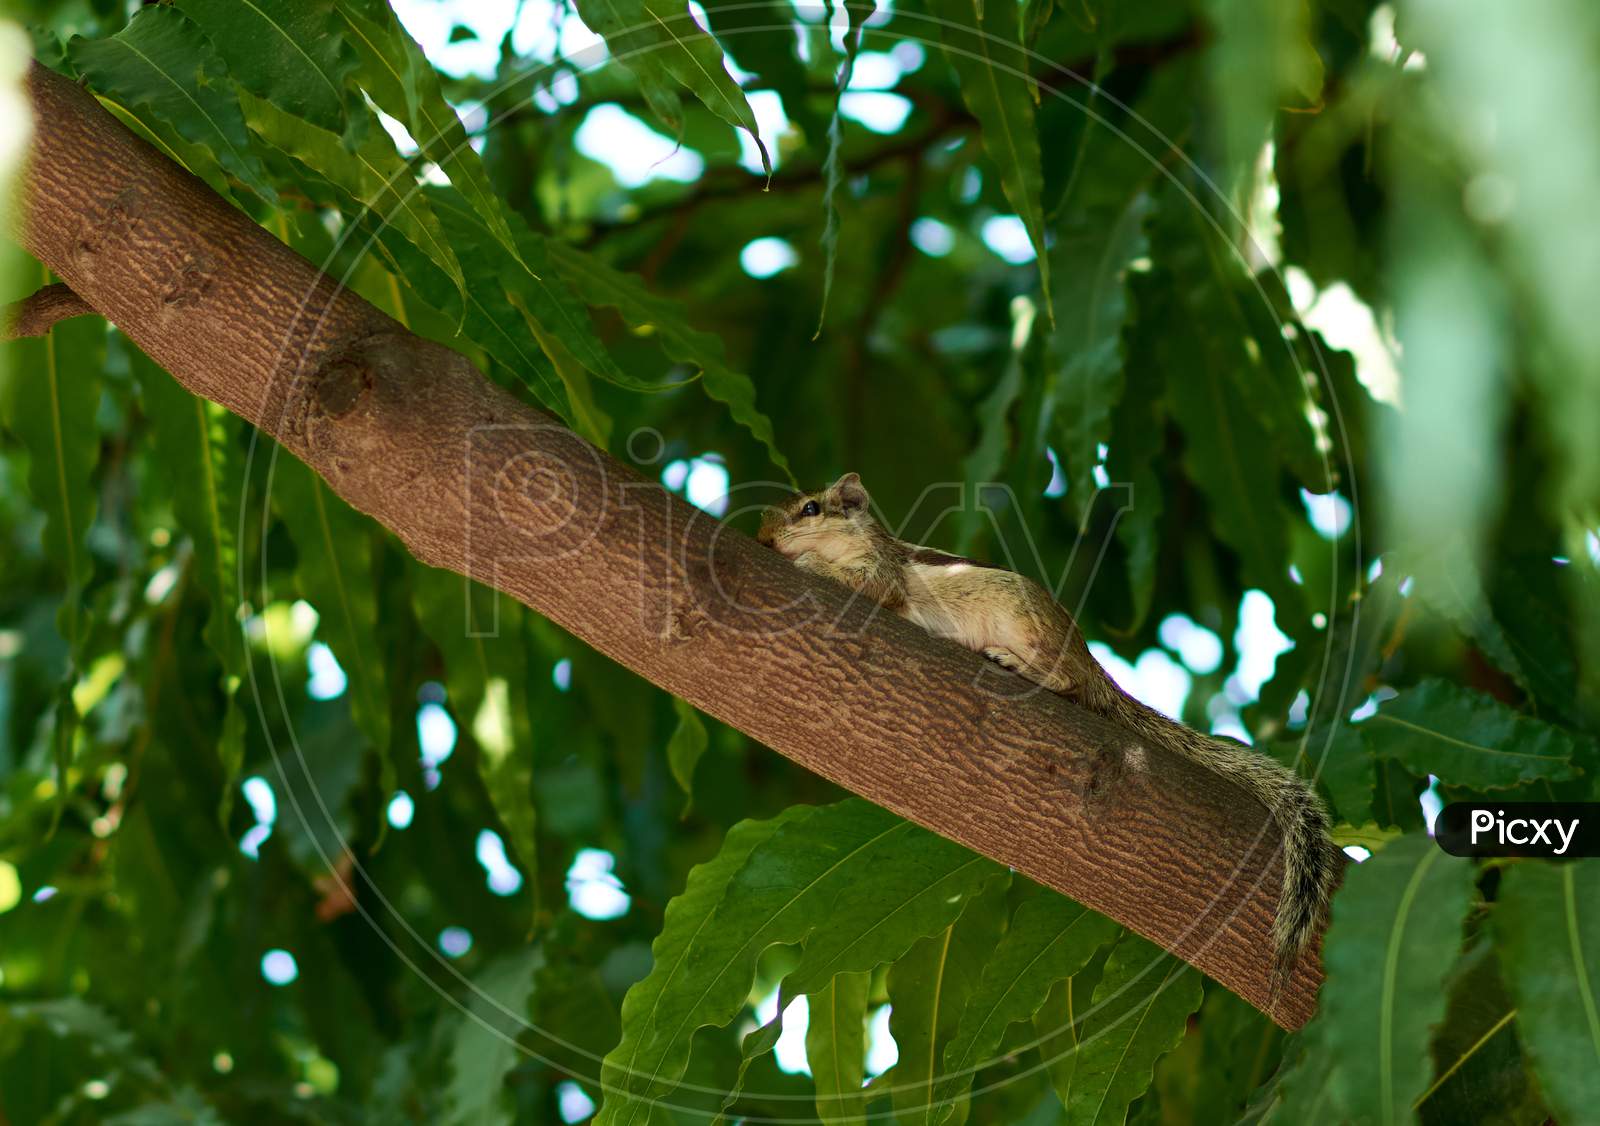 Northern Palm Squirrel (Funambulus Pennantii) Also Called The Five-Striped Palm Squirrel